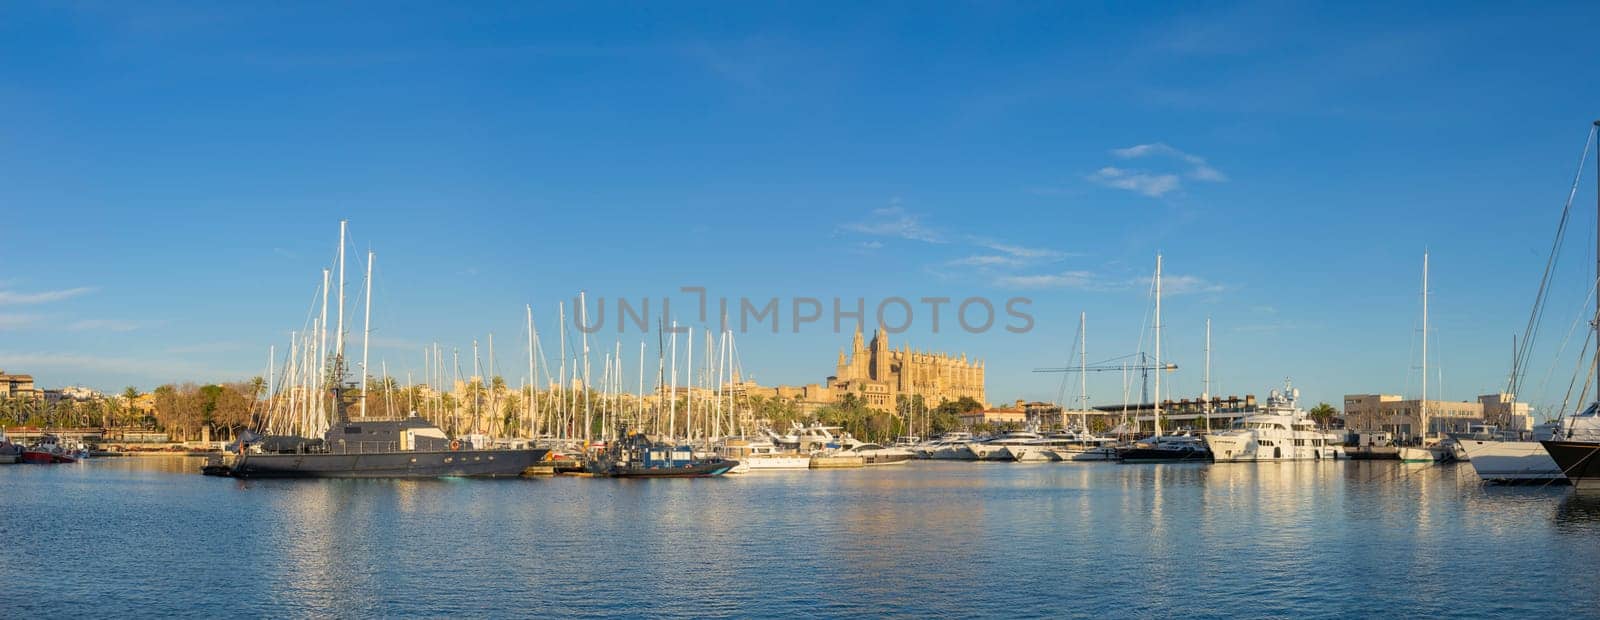 The historic Mallorca Cathedral stands tall behind the serene Palma Bay filled with elegant yachts